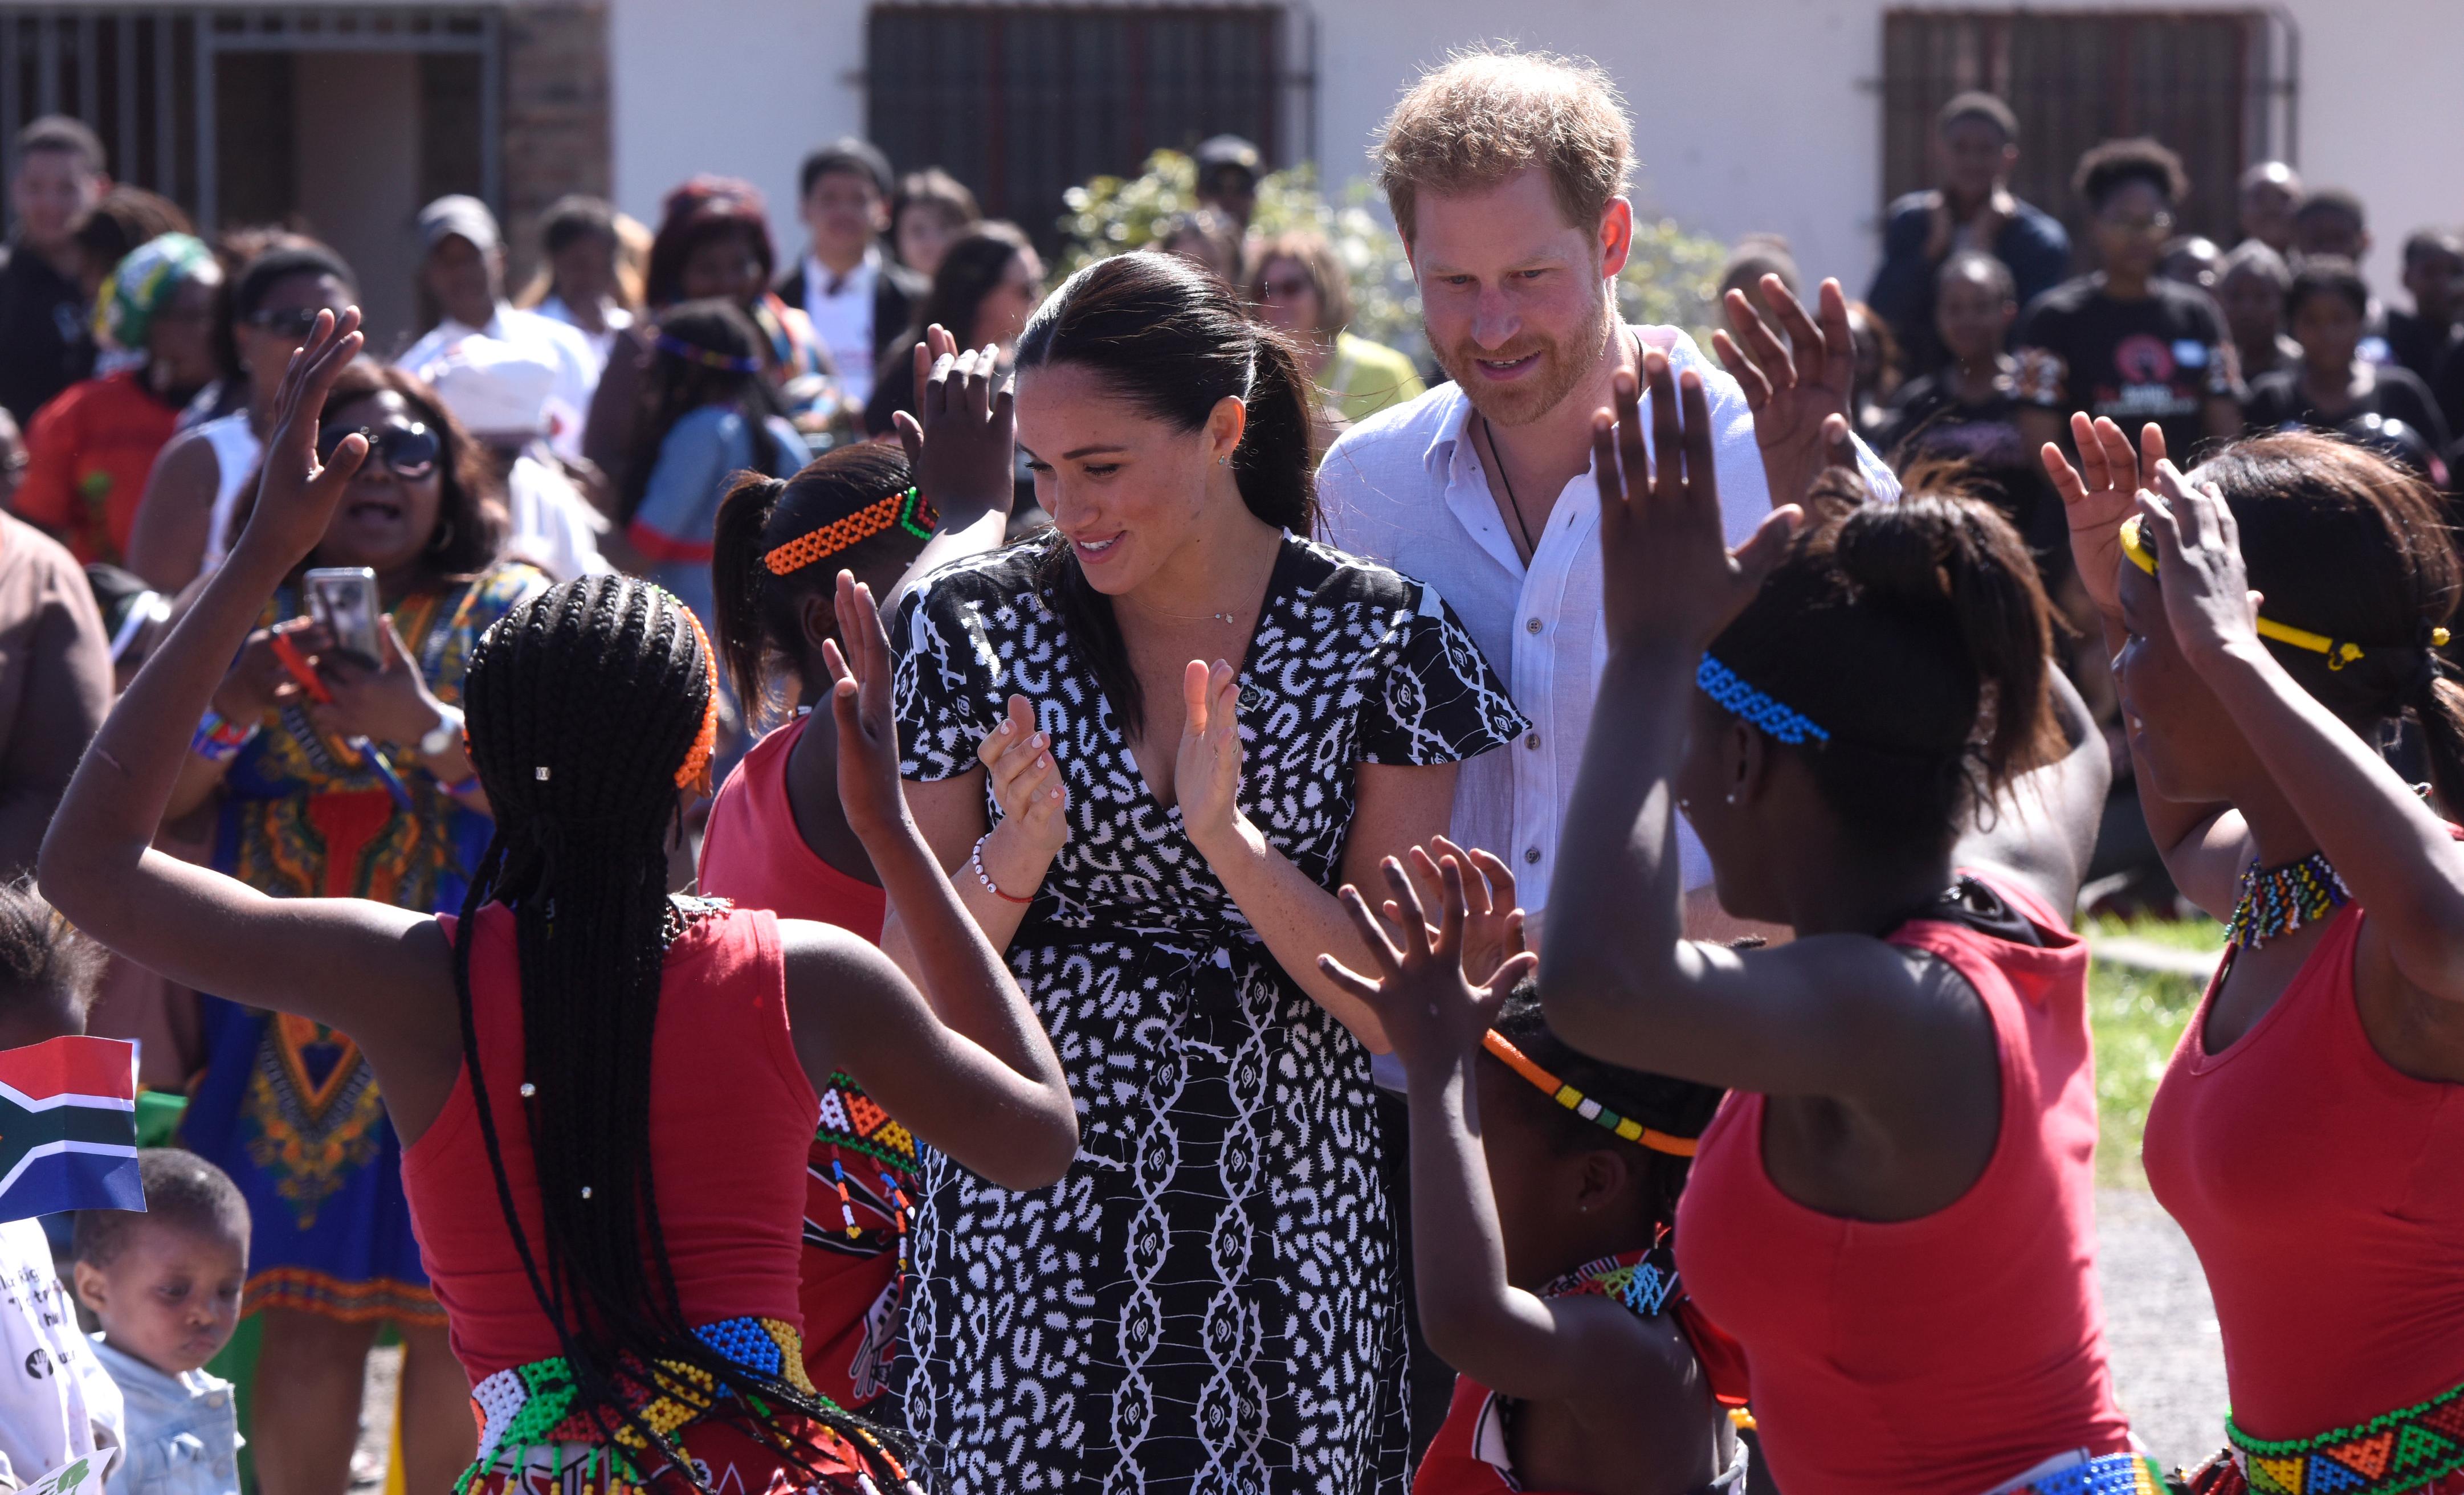 Meghan and Prince Harry in Africa